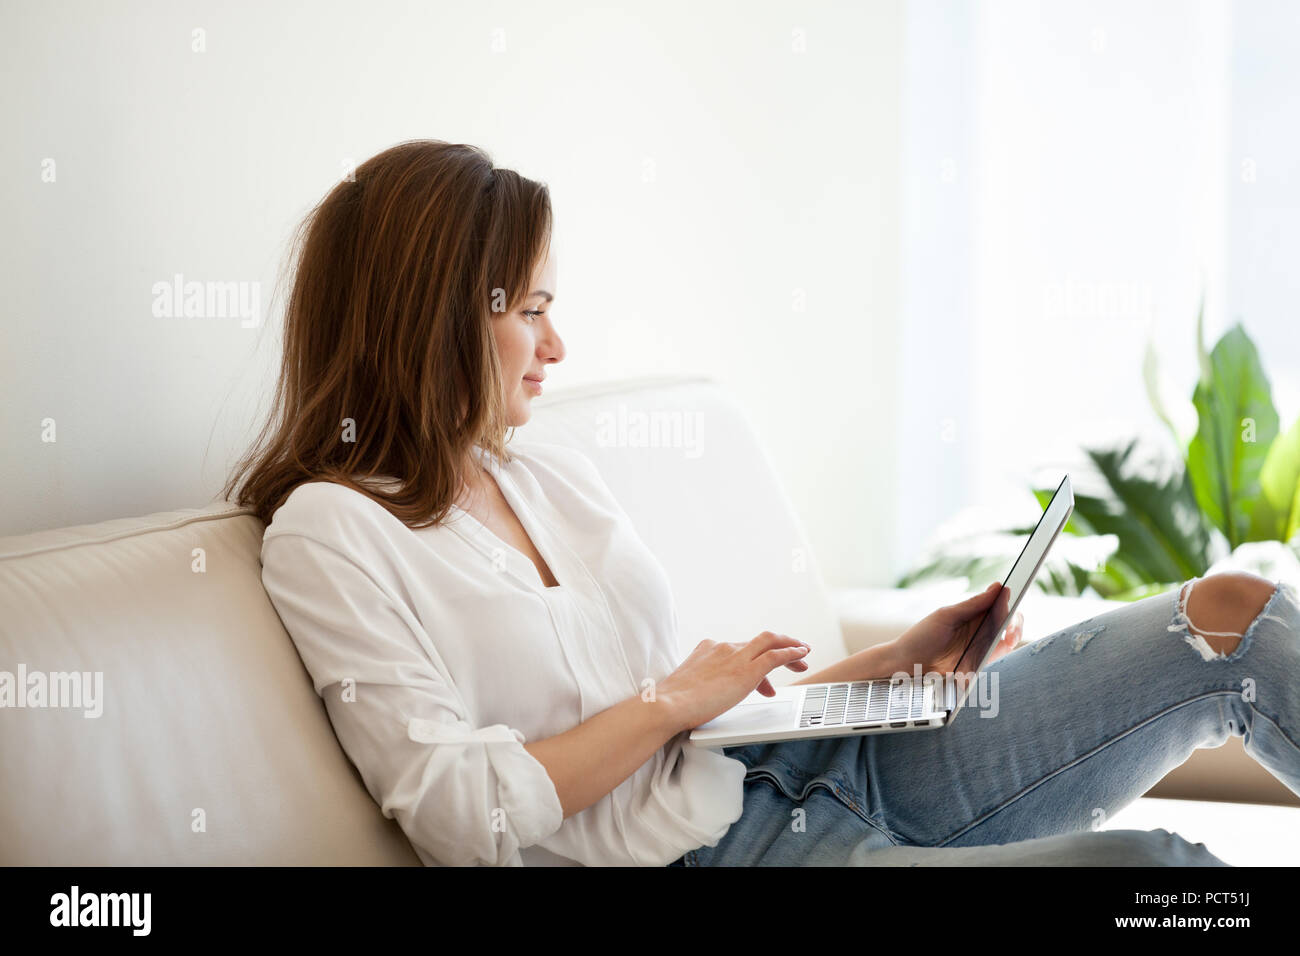 Smiling girl browsing web during weekend at home Stock Photo